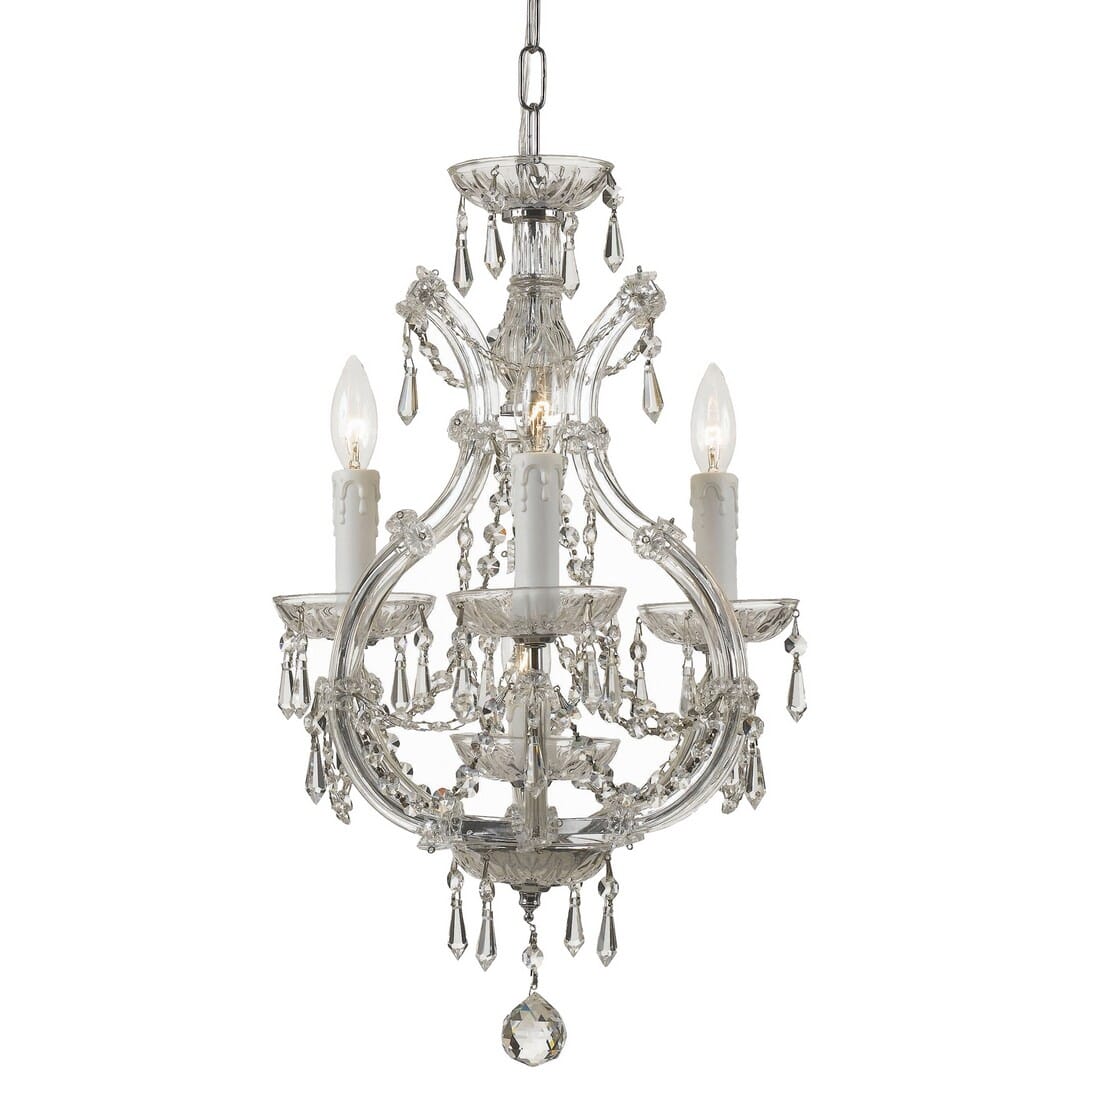 Maria Theresa 4-Light 21"" Mini Chandelier in Chrome with Clear Italian Crystals -  Crystorama, 4473-CH-CL-I